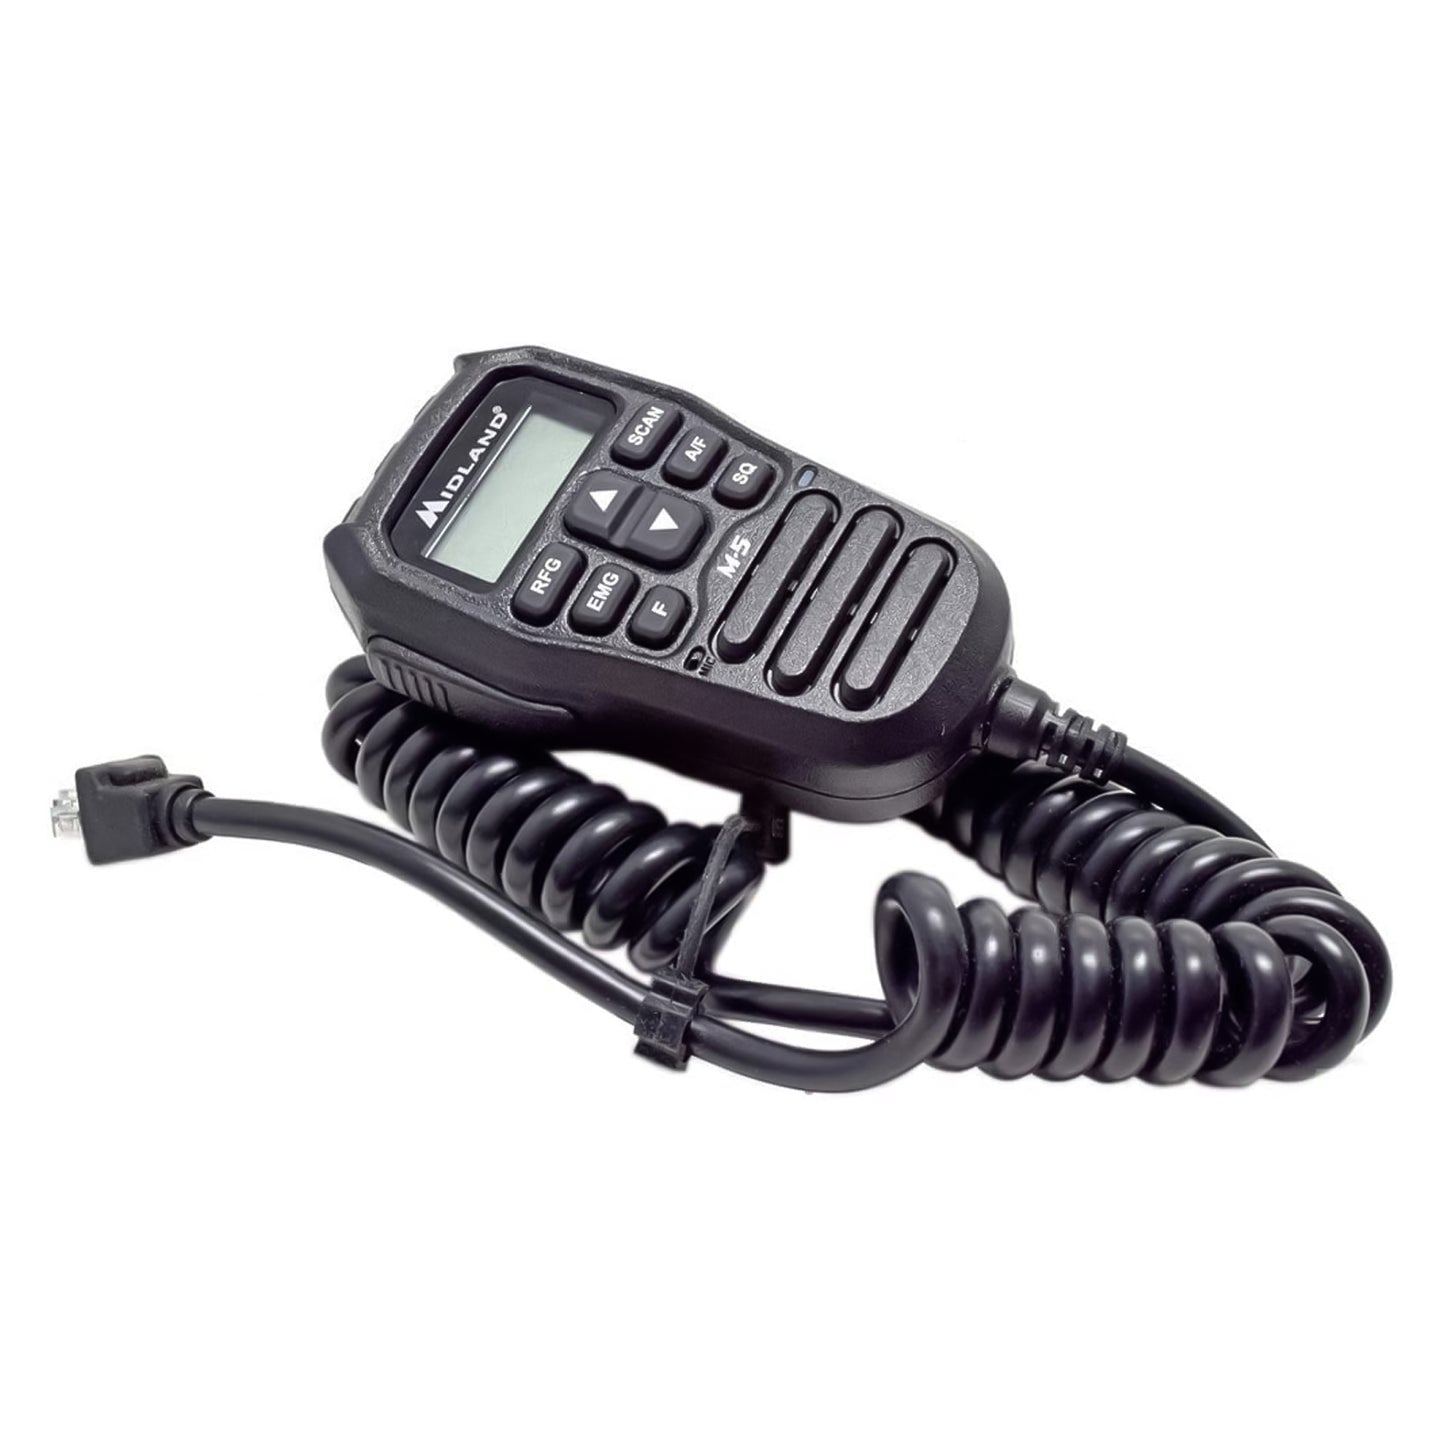 Midland M-5 CB Multi-band 40-channel AM/FM vehicle transceiver radio, compact transceiver with controls on the microphone with LCD display, 2-pin Kenwood socket and USB